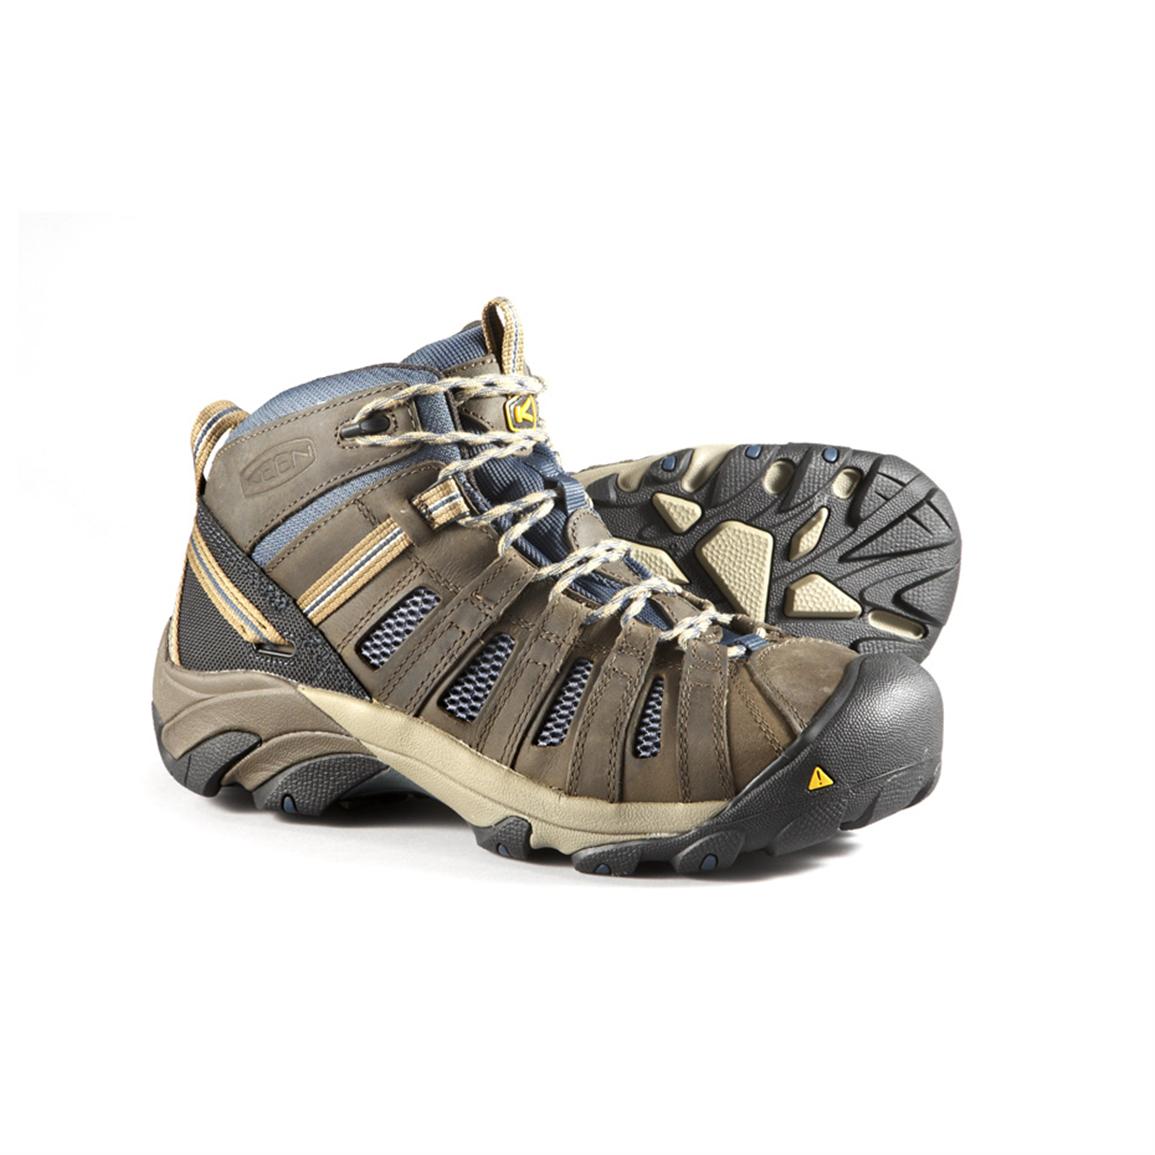 Men's KEEN Utility Flint Mid Steel Toe Shoes - 423575, Work Boots at ...